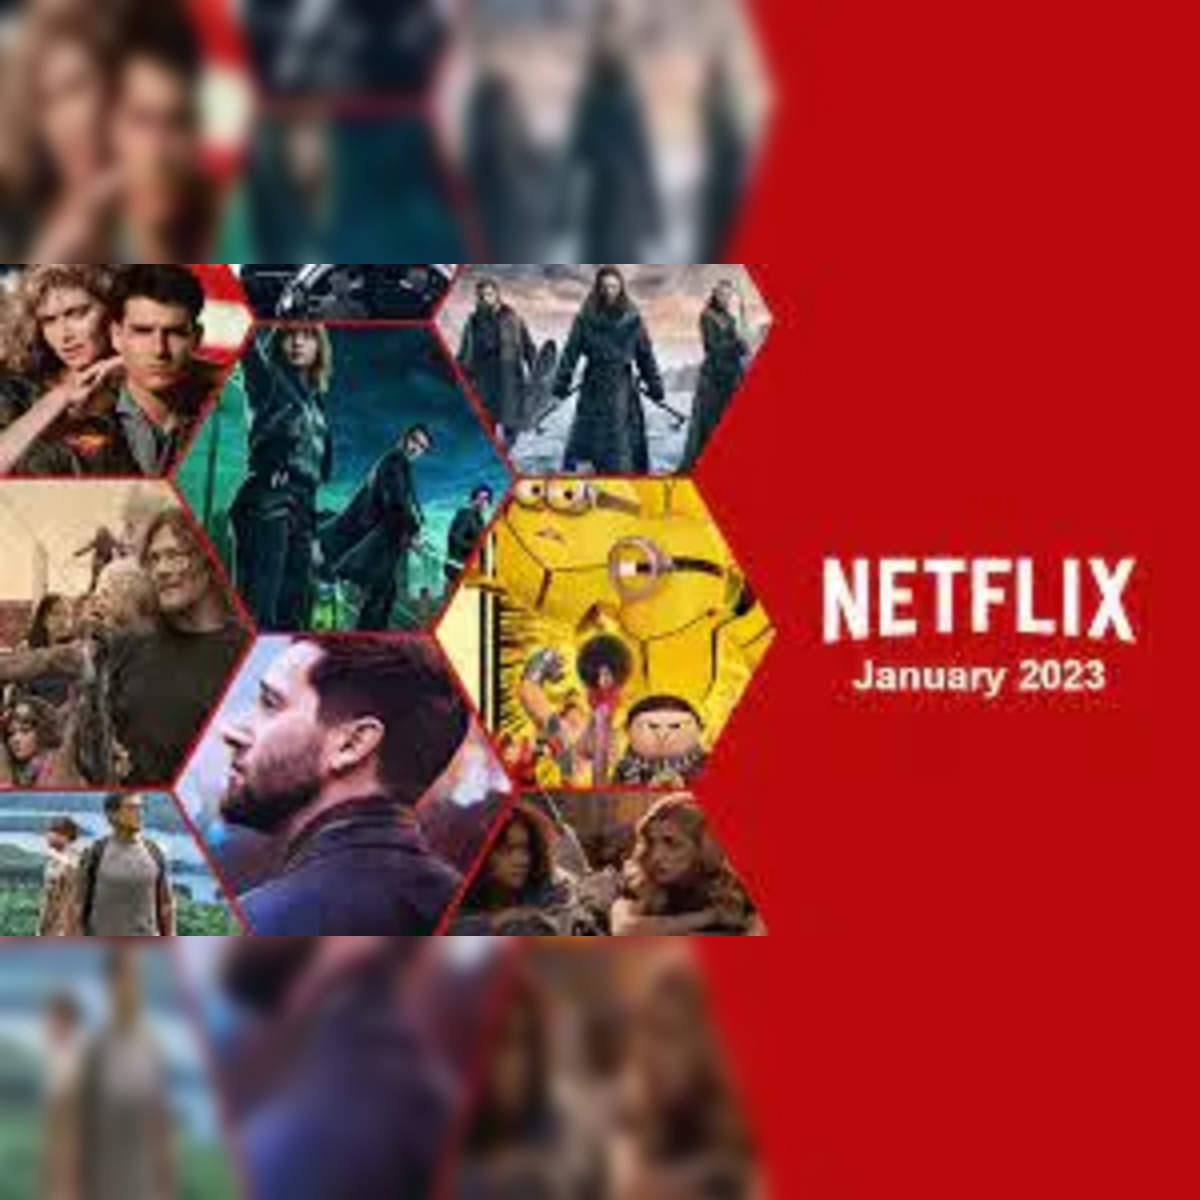 Stranger Things and the 16 best Netflix original series of 2022